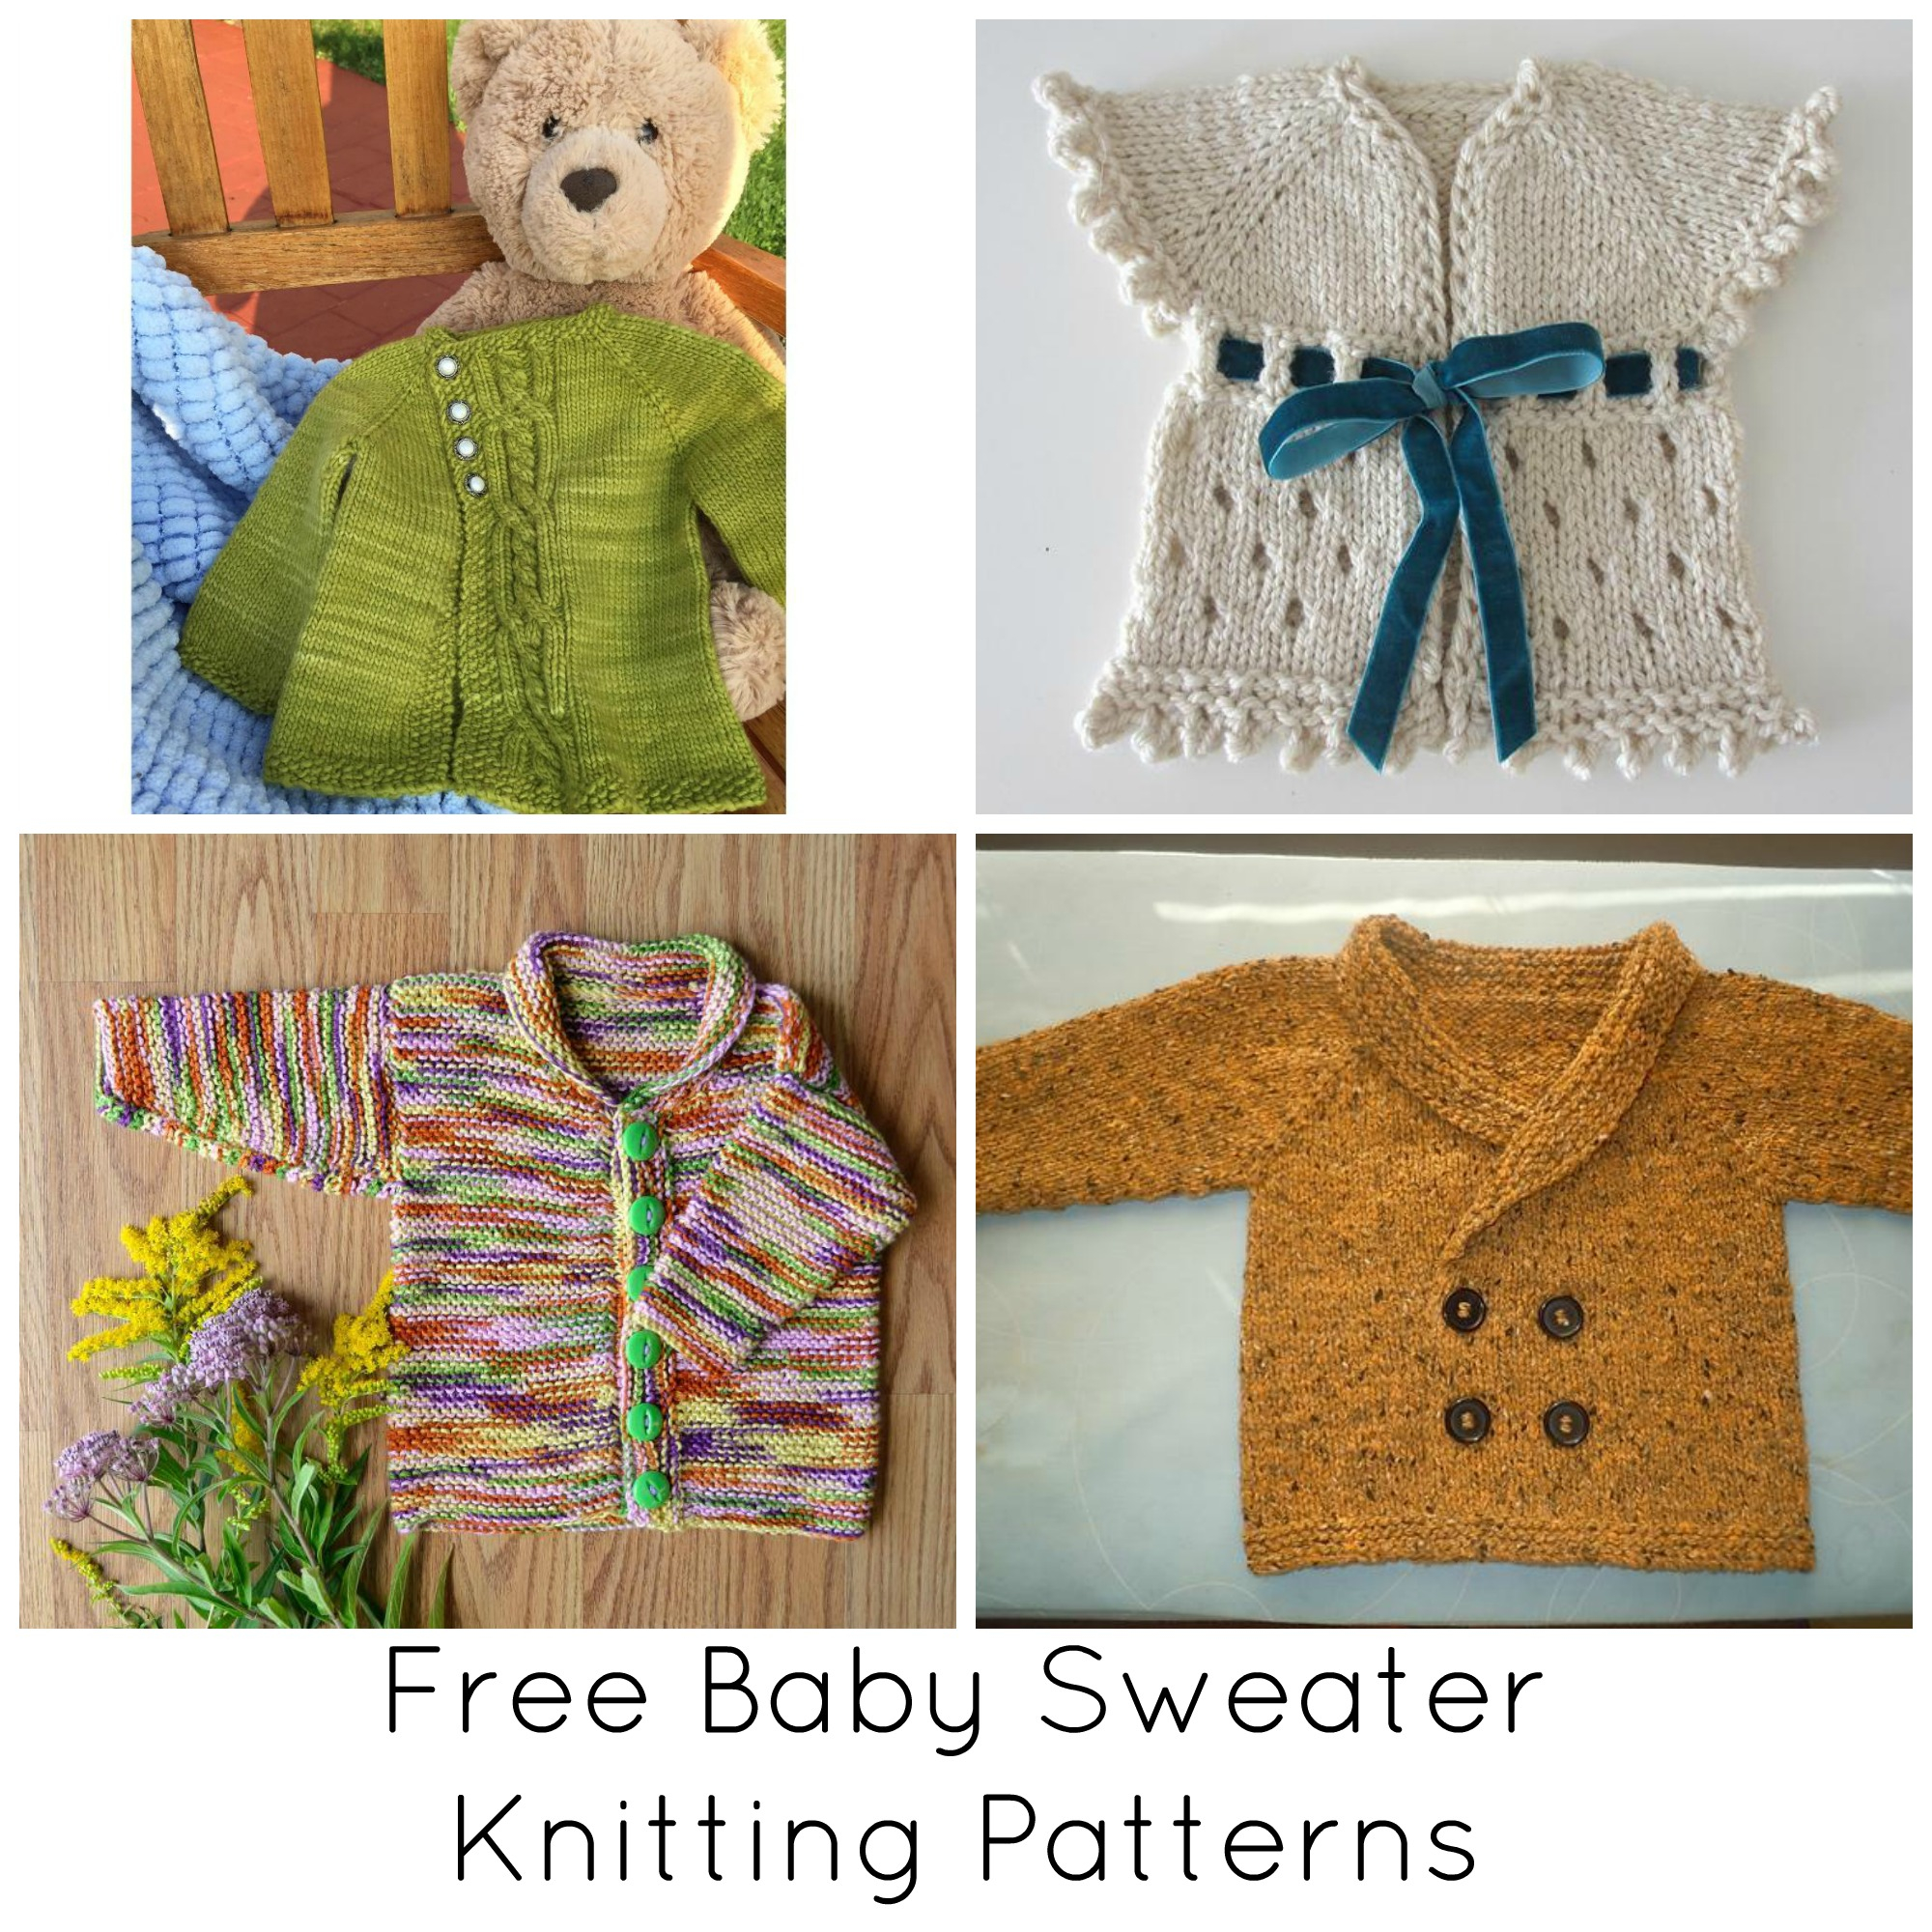 Knitted Childrens Sweaters Free Patterns Our Favorite Free Ba Sweater Knitting Patterns